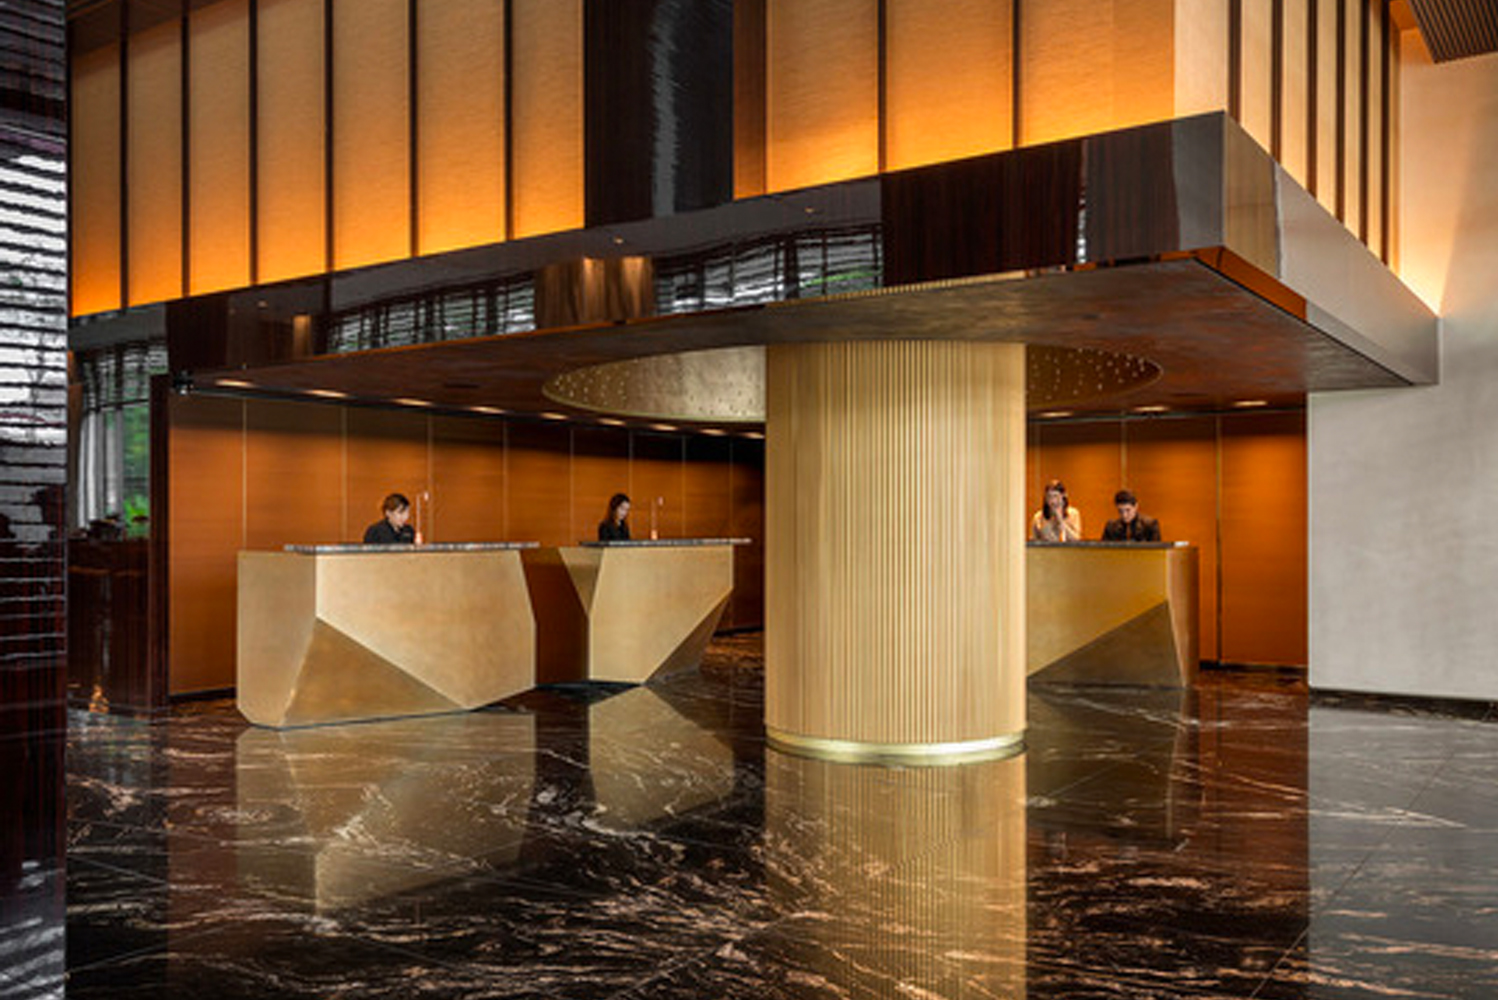 BAMO completed its 12th project for Four Seasons Hotels  Resorts the Four Seasons Hotel So Paulo at Naes Unidas 